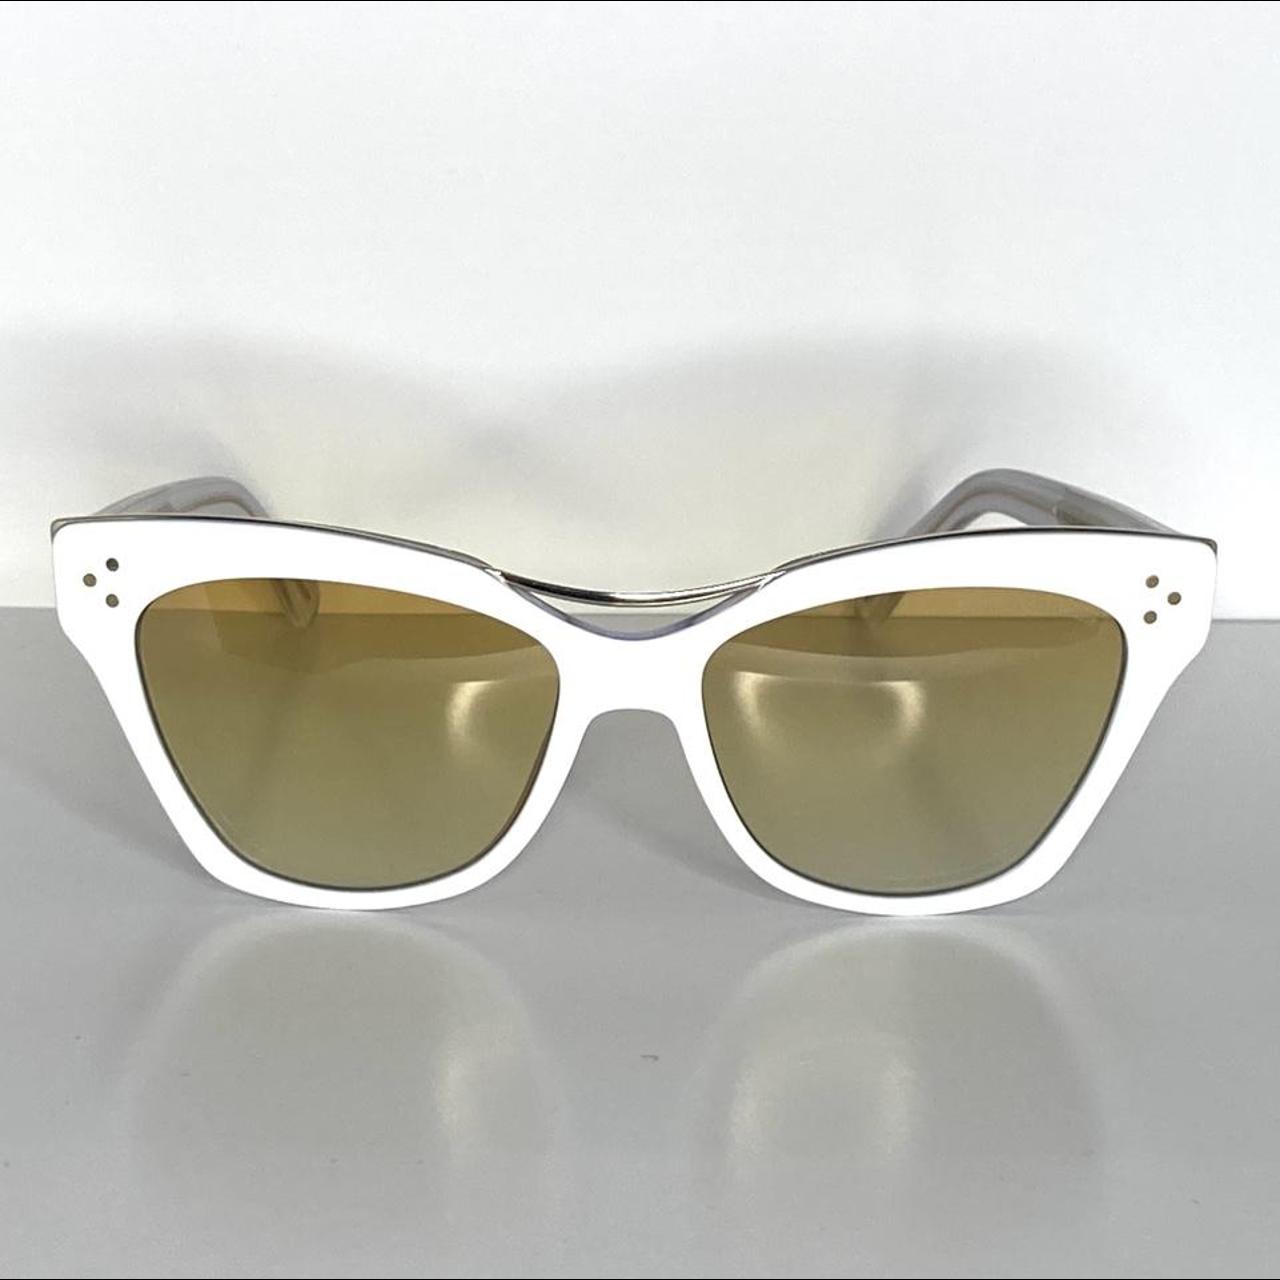 Product Image 3 - PRODUCT:Sunglasses
BRAND: Cutler & Gross 